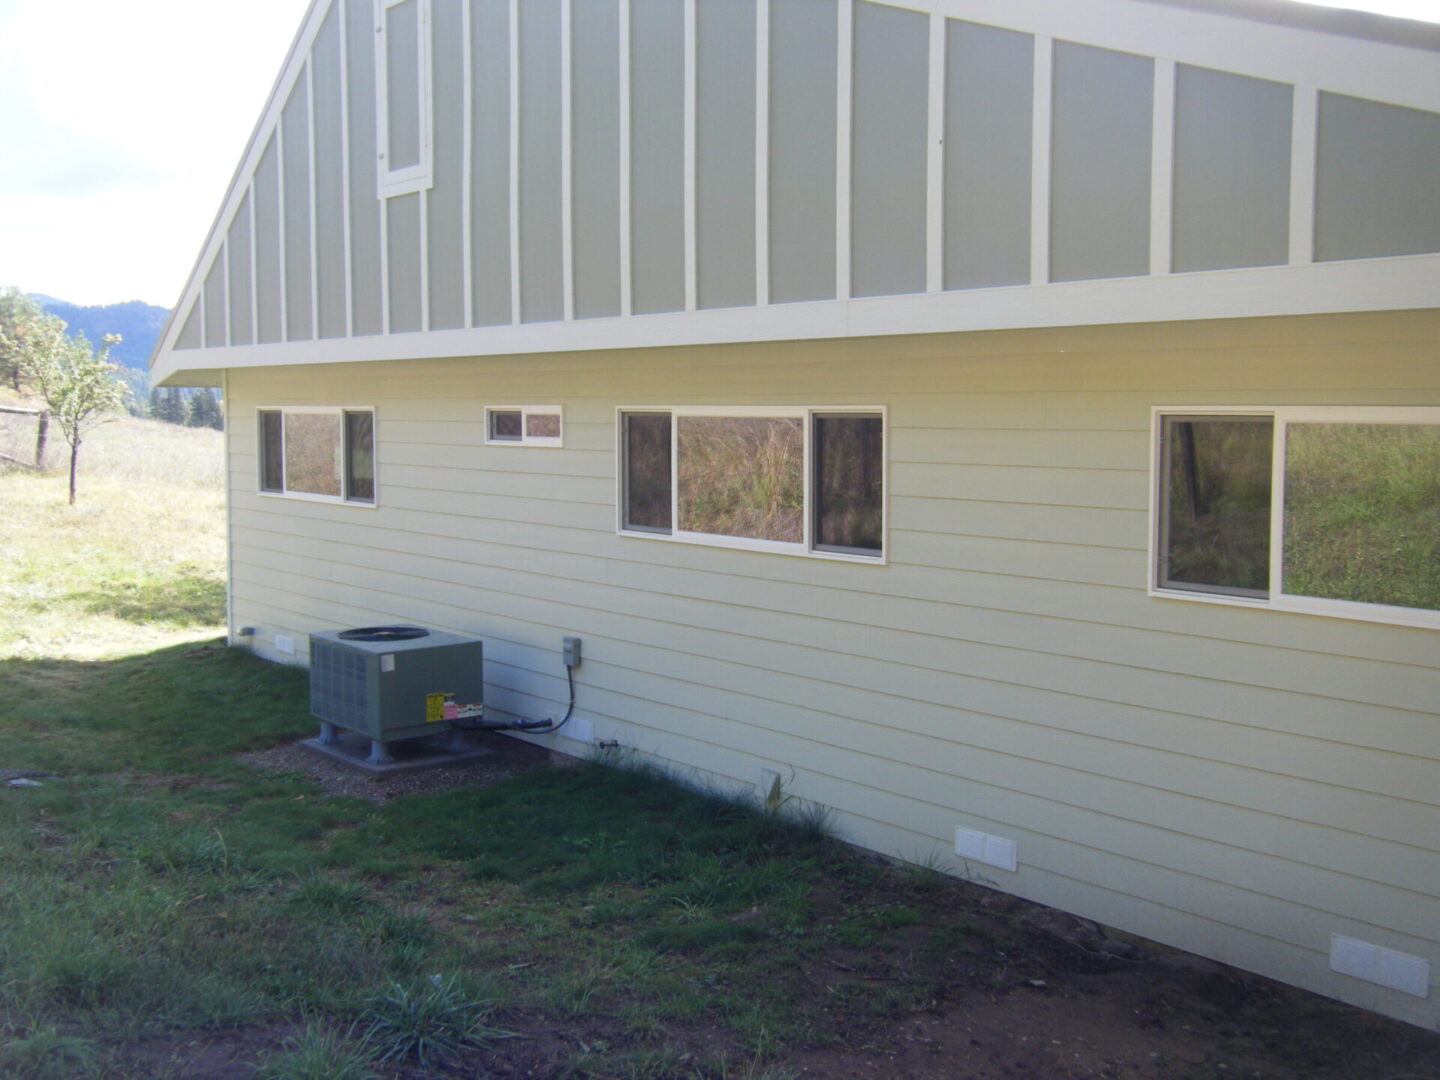 Outer view of a house with an installed HVAC system